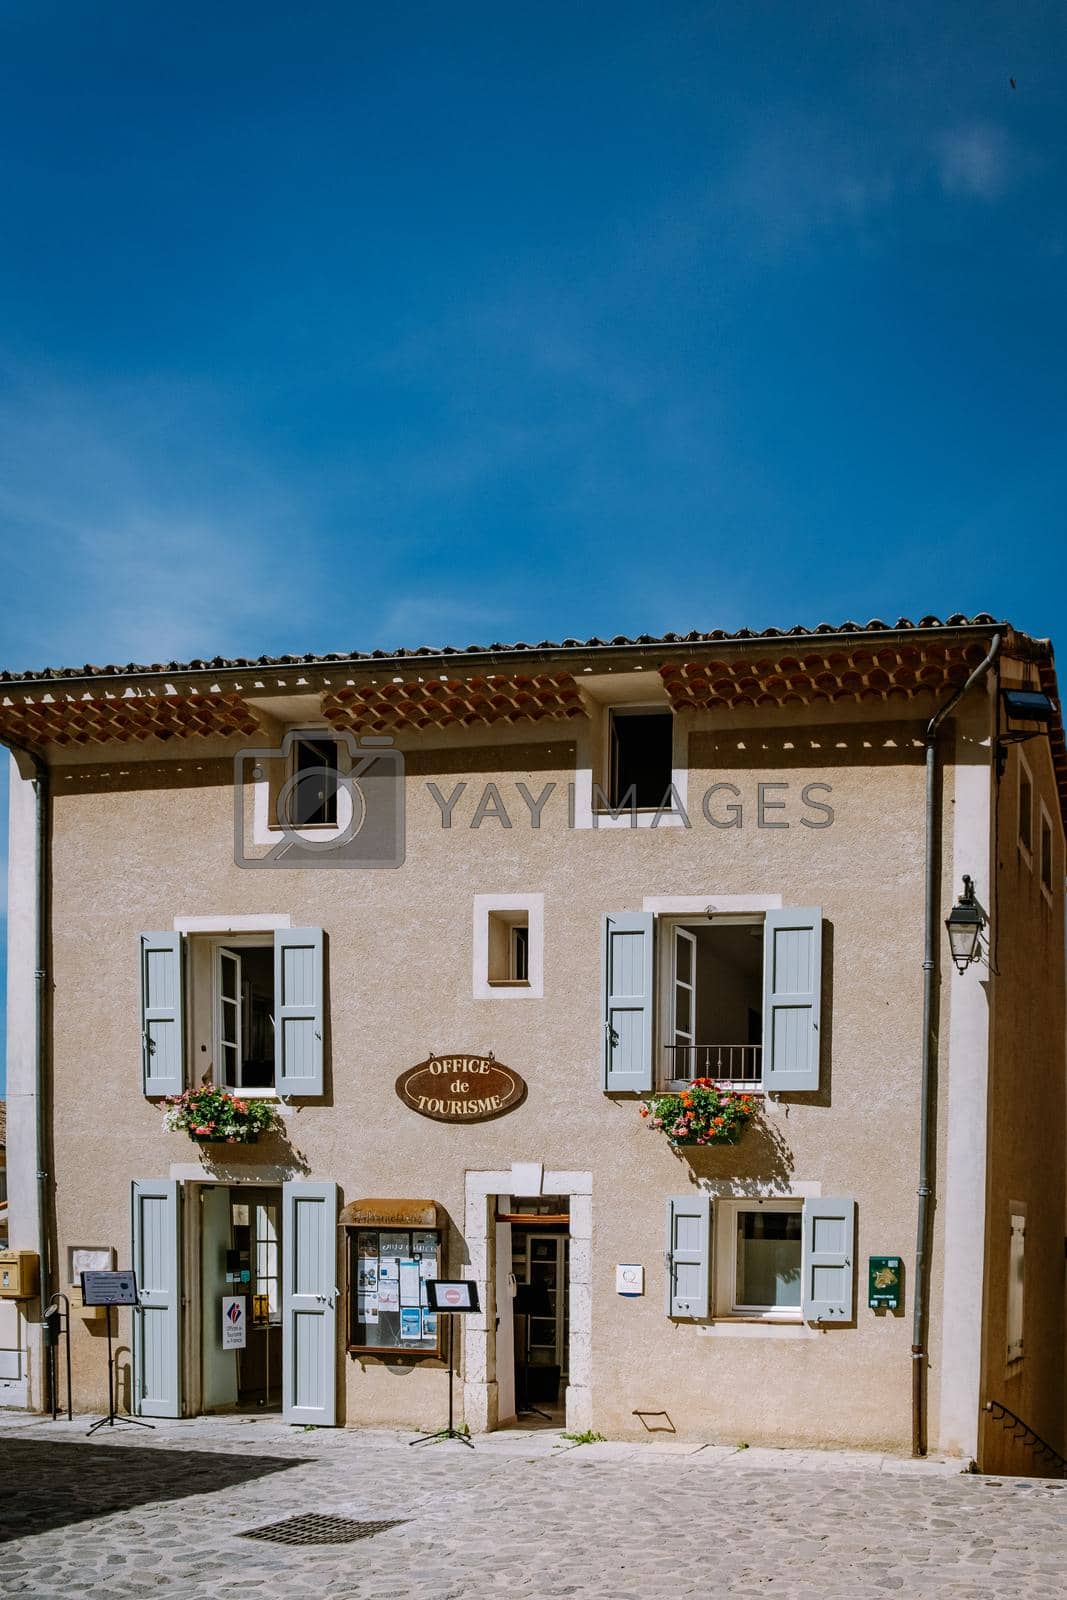 Royalty free image of The Village of Moustiers-Sainte-Marie, Provence, France June 2020 by fokkebok